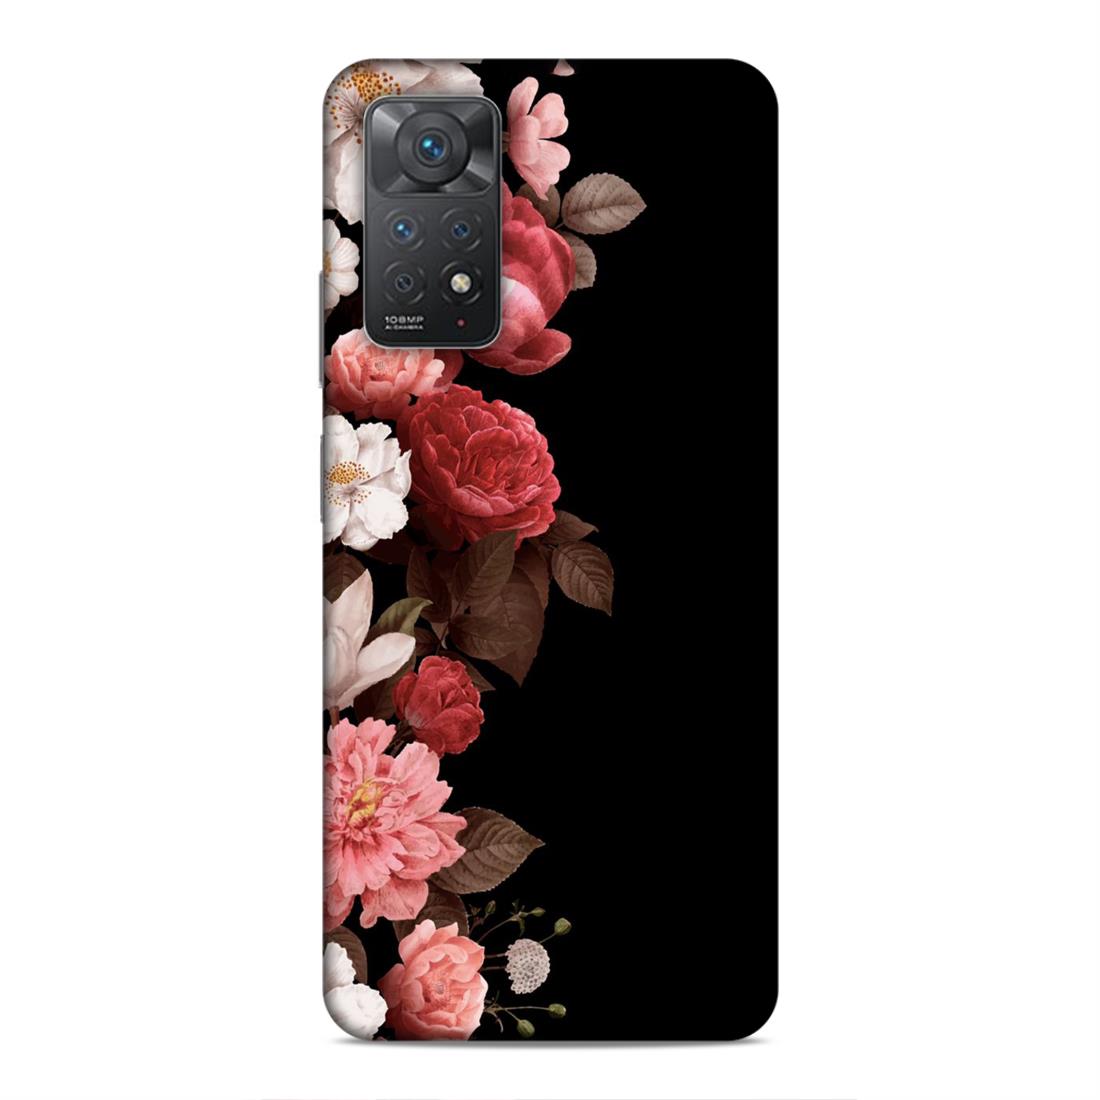 Floral in Black Hard Back Case For Xiaomi Redmi Note 11 Pro 4G / 5G / Note 11 Pro Plus 5G